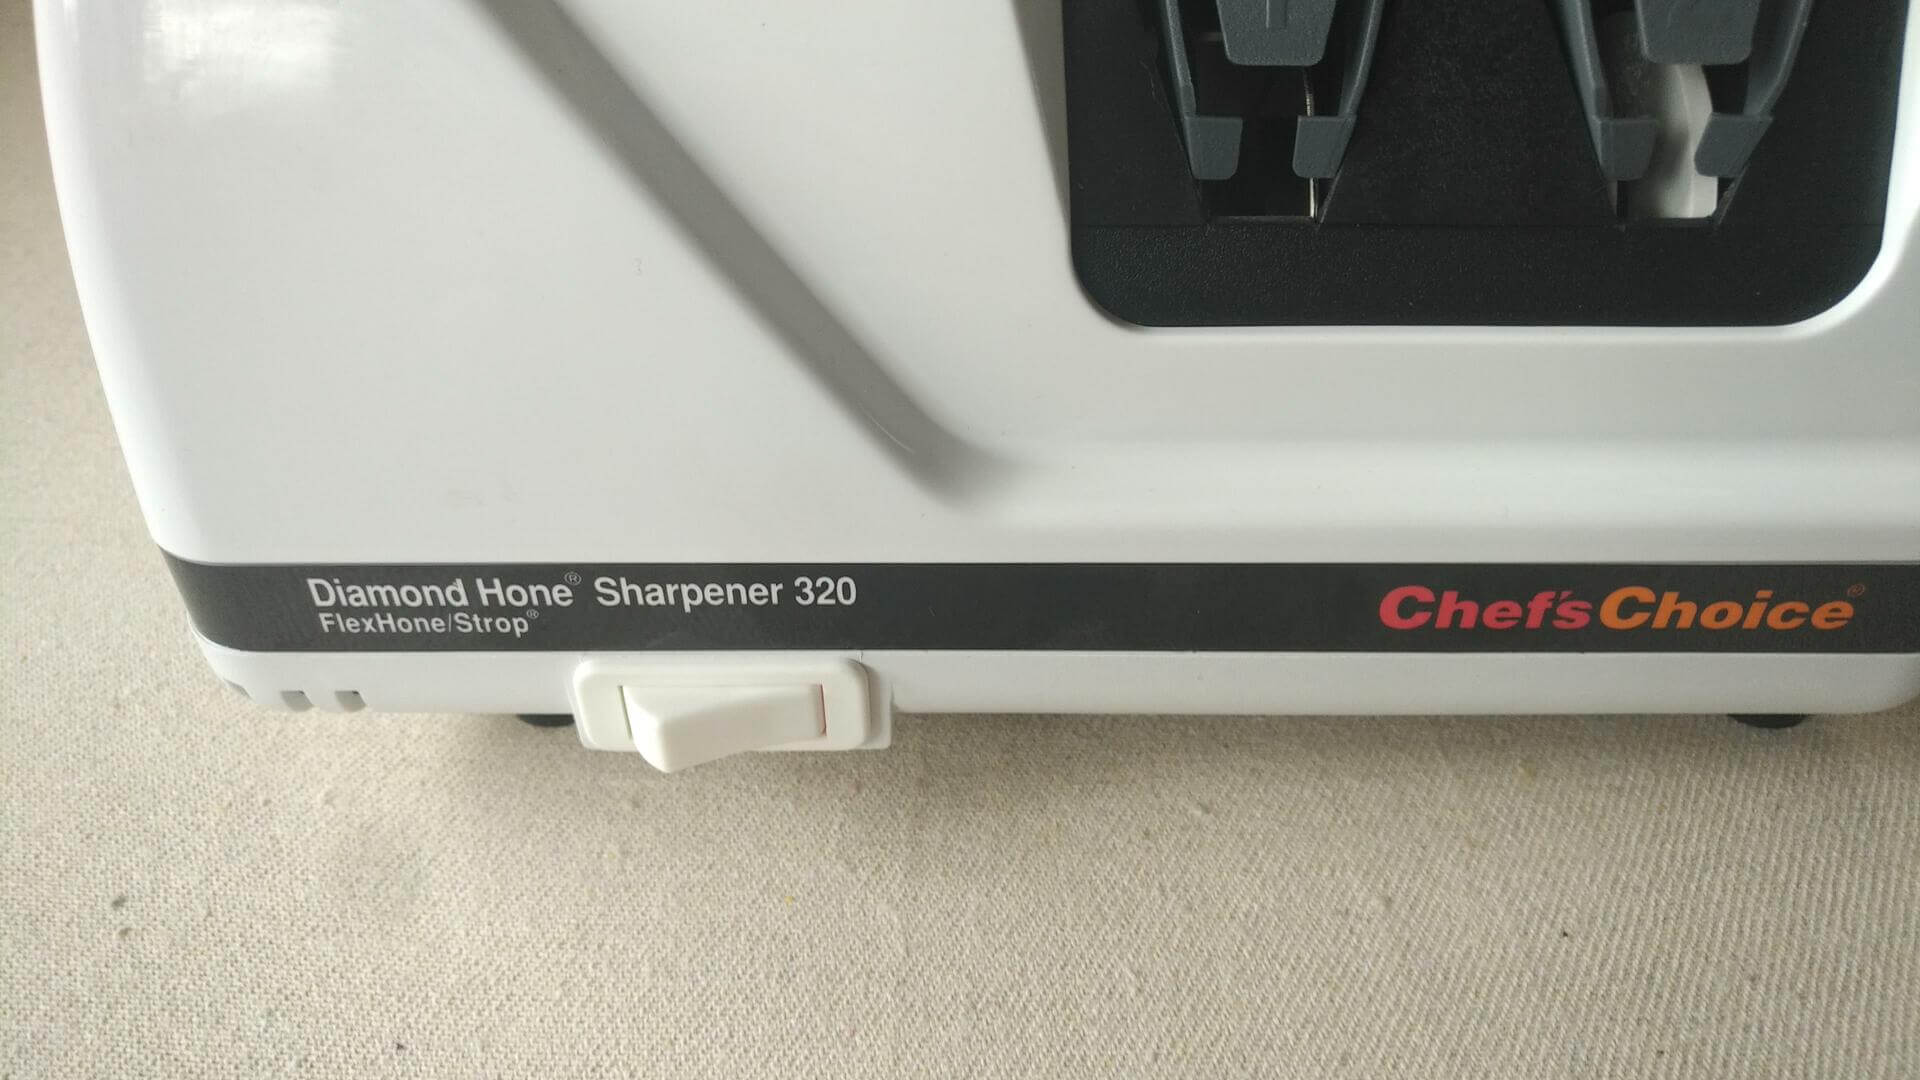 Chef's Choice model  320 is professional sharpener deal for sharpening all types of knives, including kitchen, household, sporting and pocket knives.